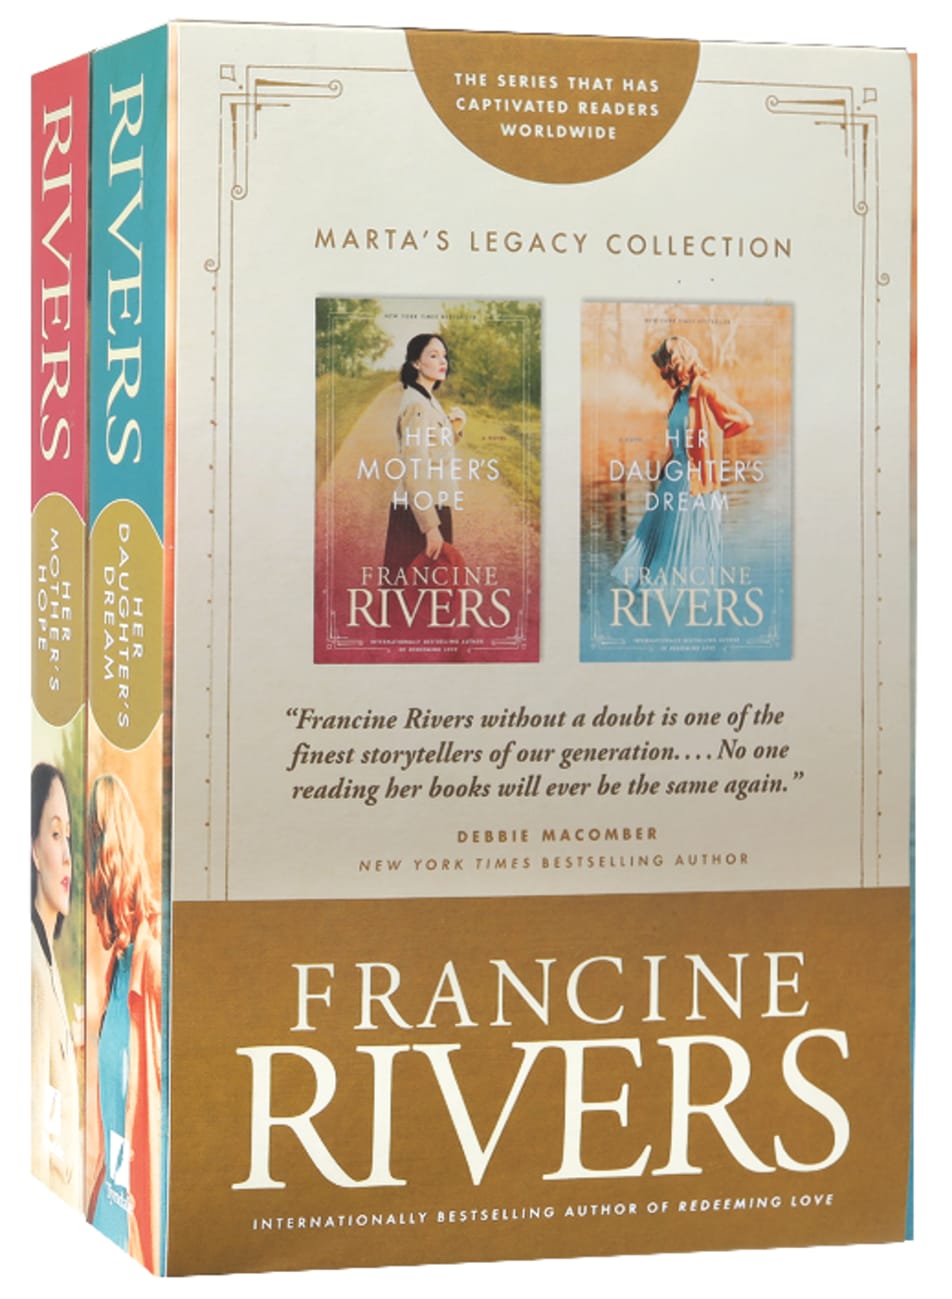 Marta's Legacy Gift Collection : Her Mother's Hope and Her Daughter's Dream (2 Volume Box Set) (Marta's Legacy Series) Paperback